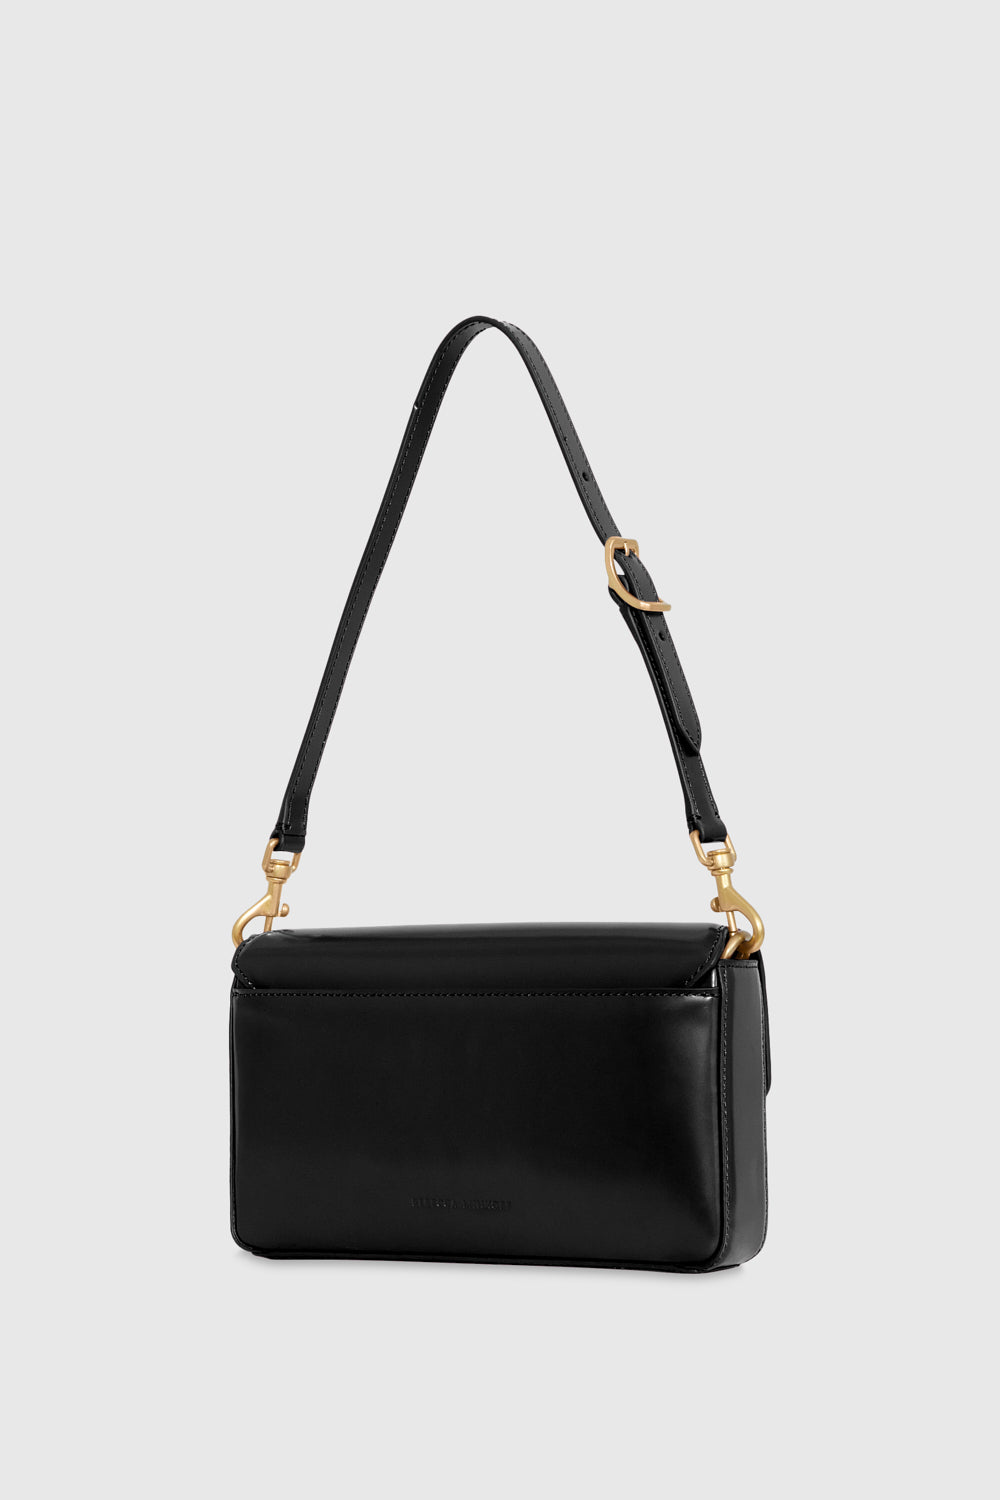 G Brand Black Women's Shoulder Bag - clothing & accessories - by